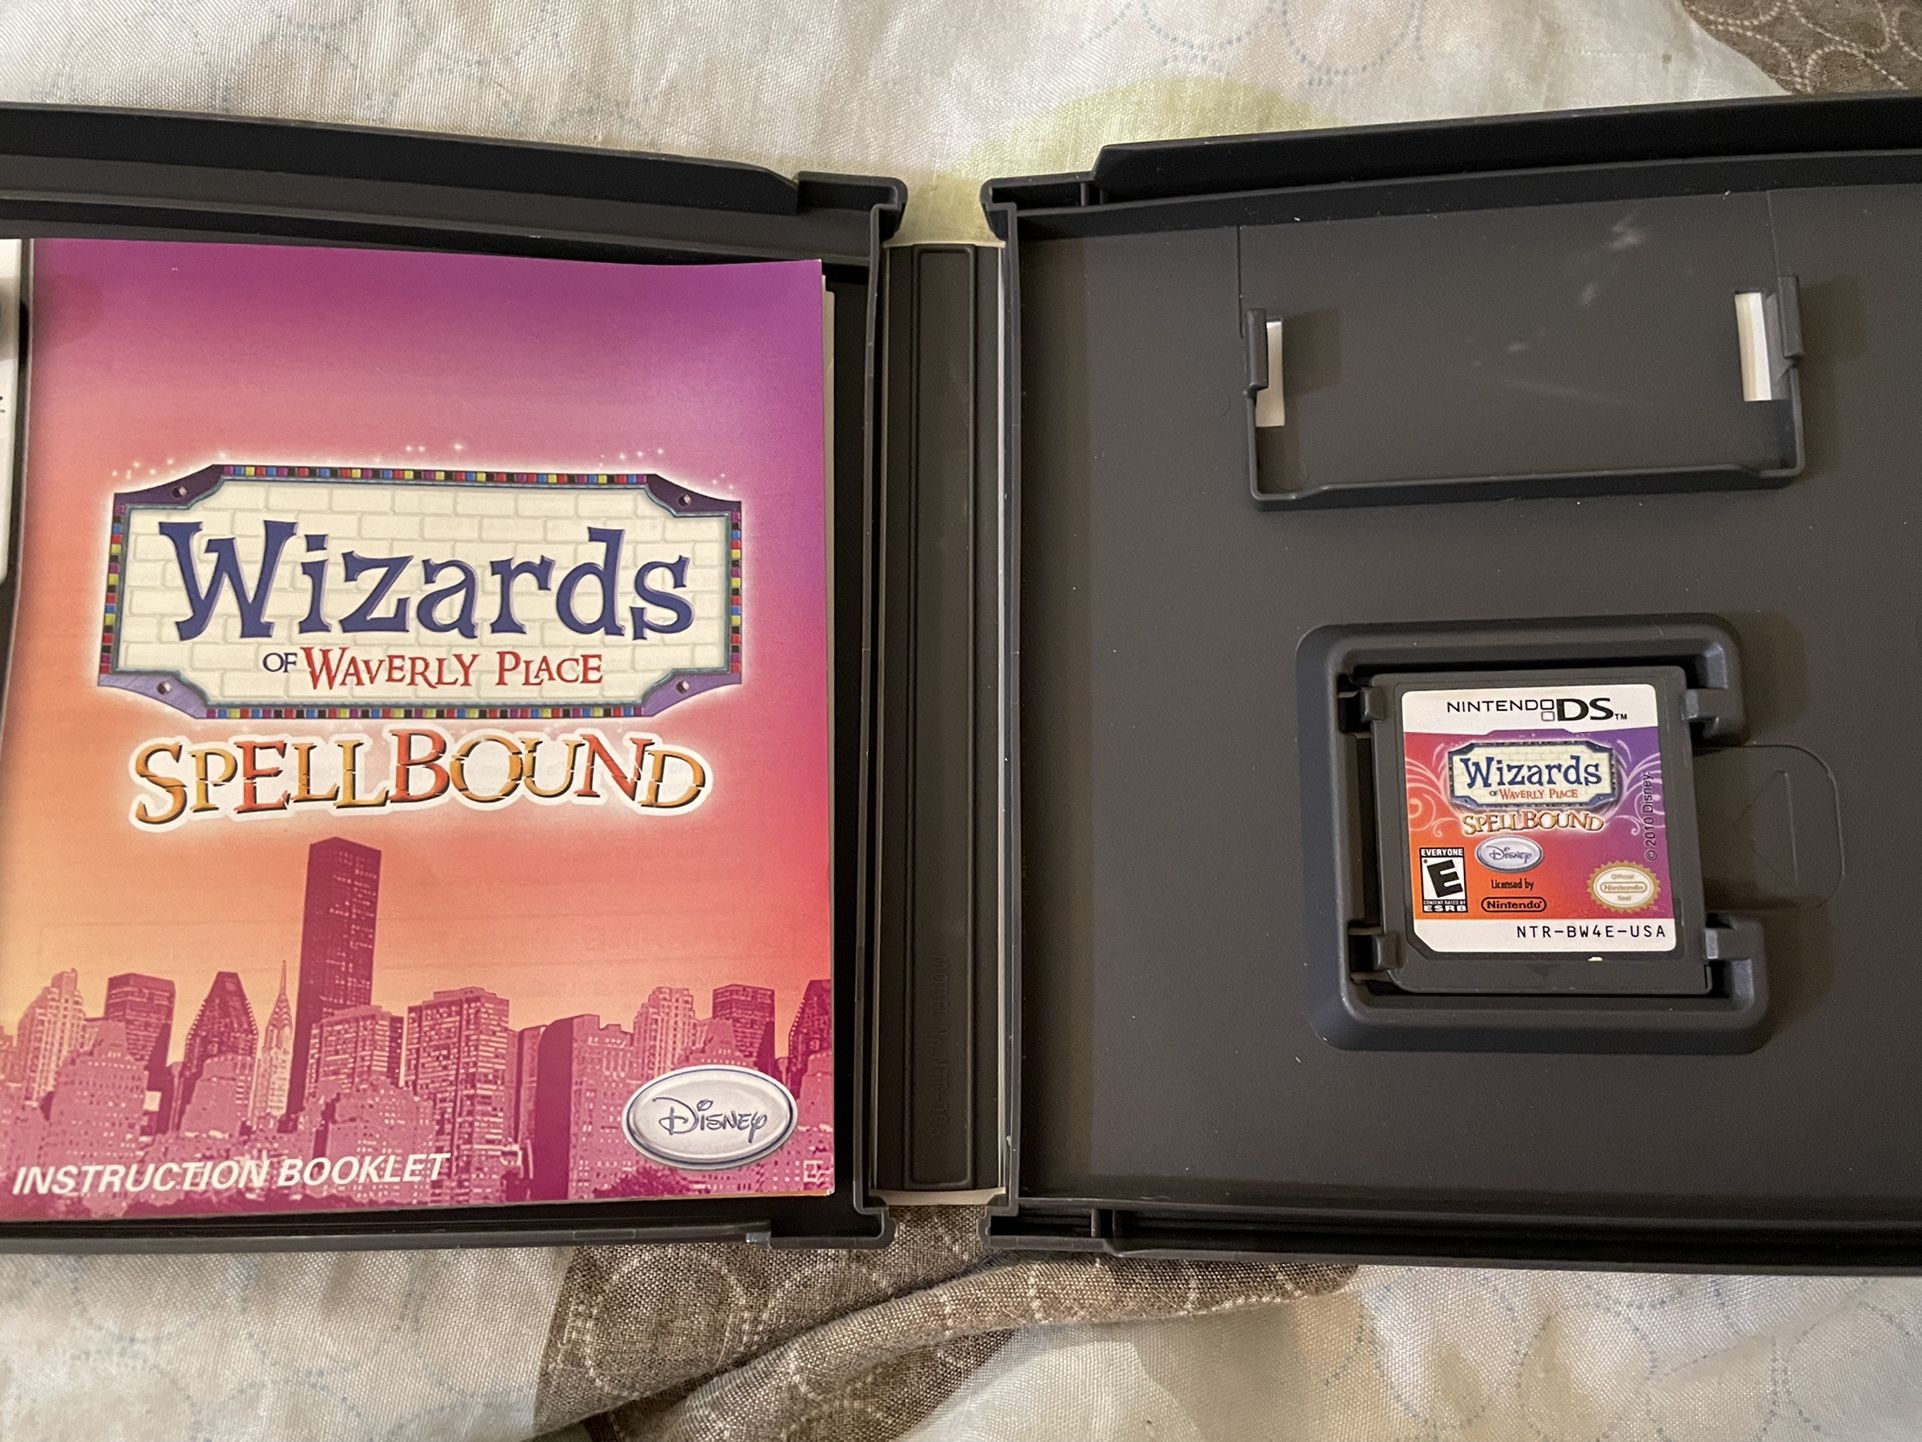 Disney Wizards Of Waverly Place: Spellbound - Nintendo Ds 